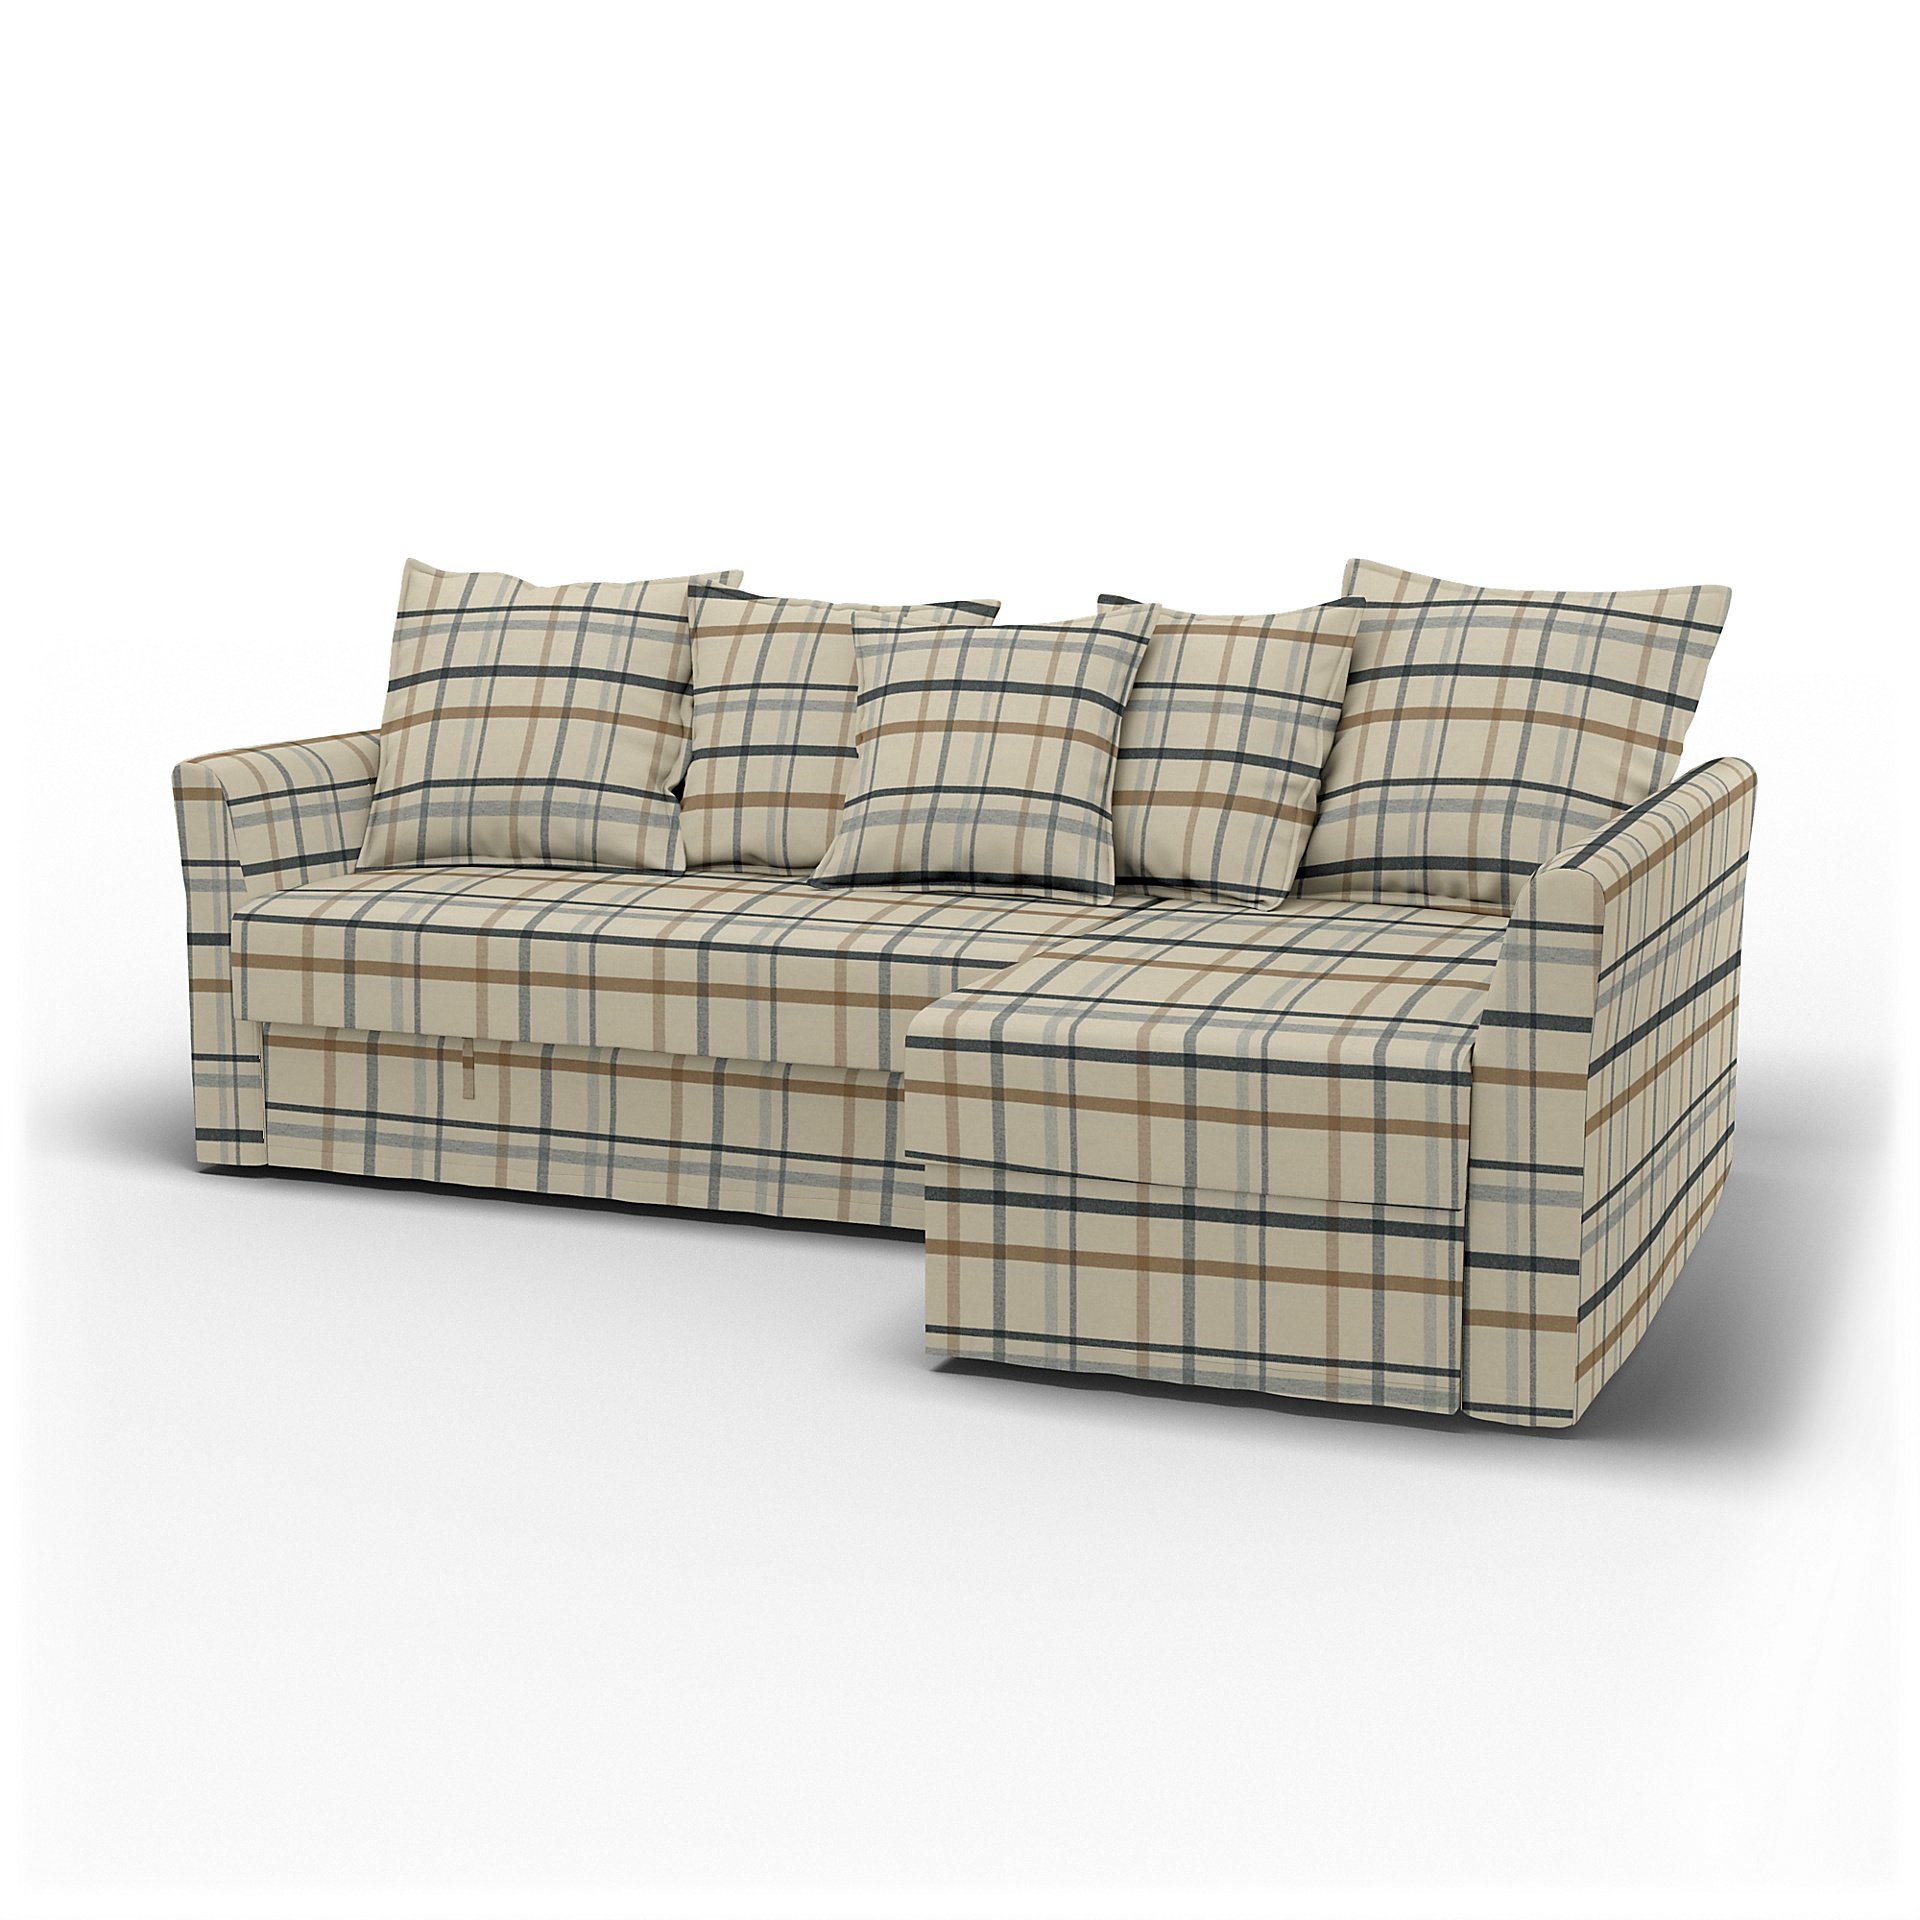 IKEA - Holmsund Sofabed with Chaiselongue, Fawn Brown, Wool - Bemz